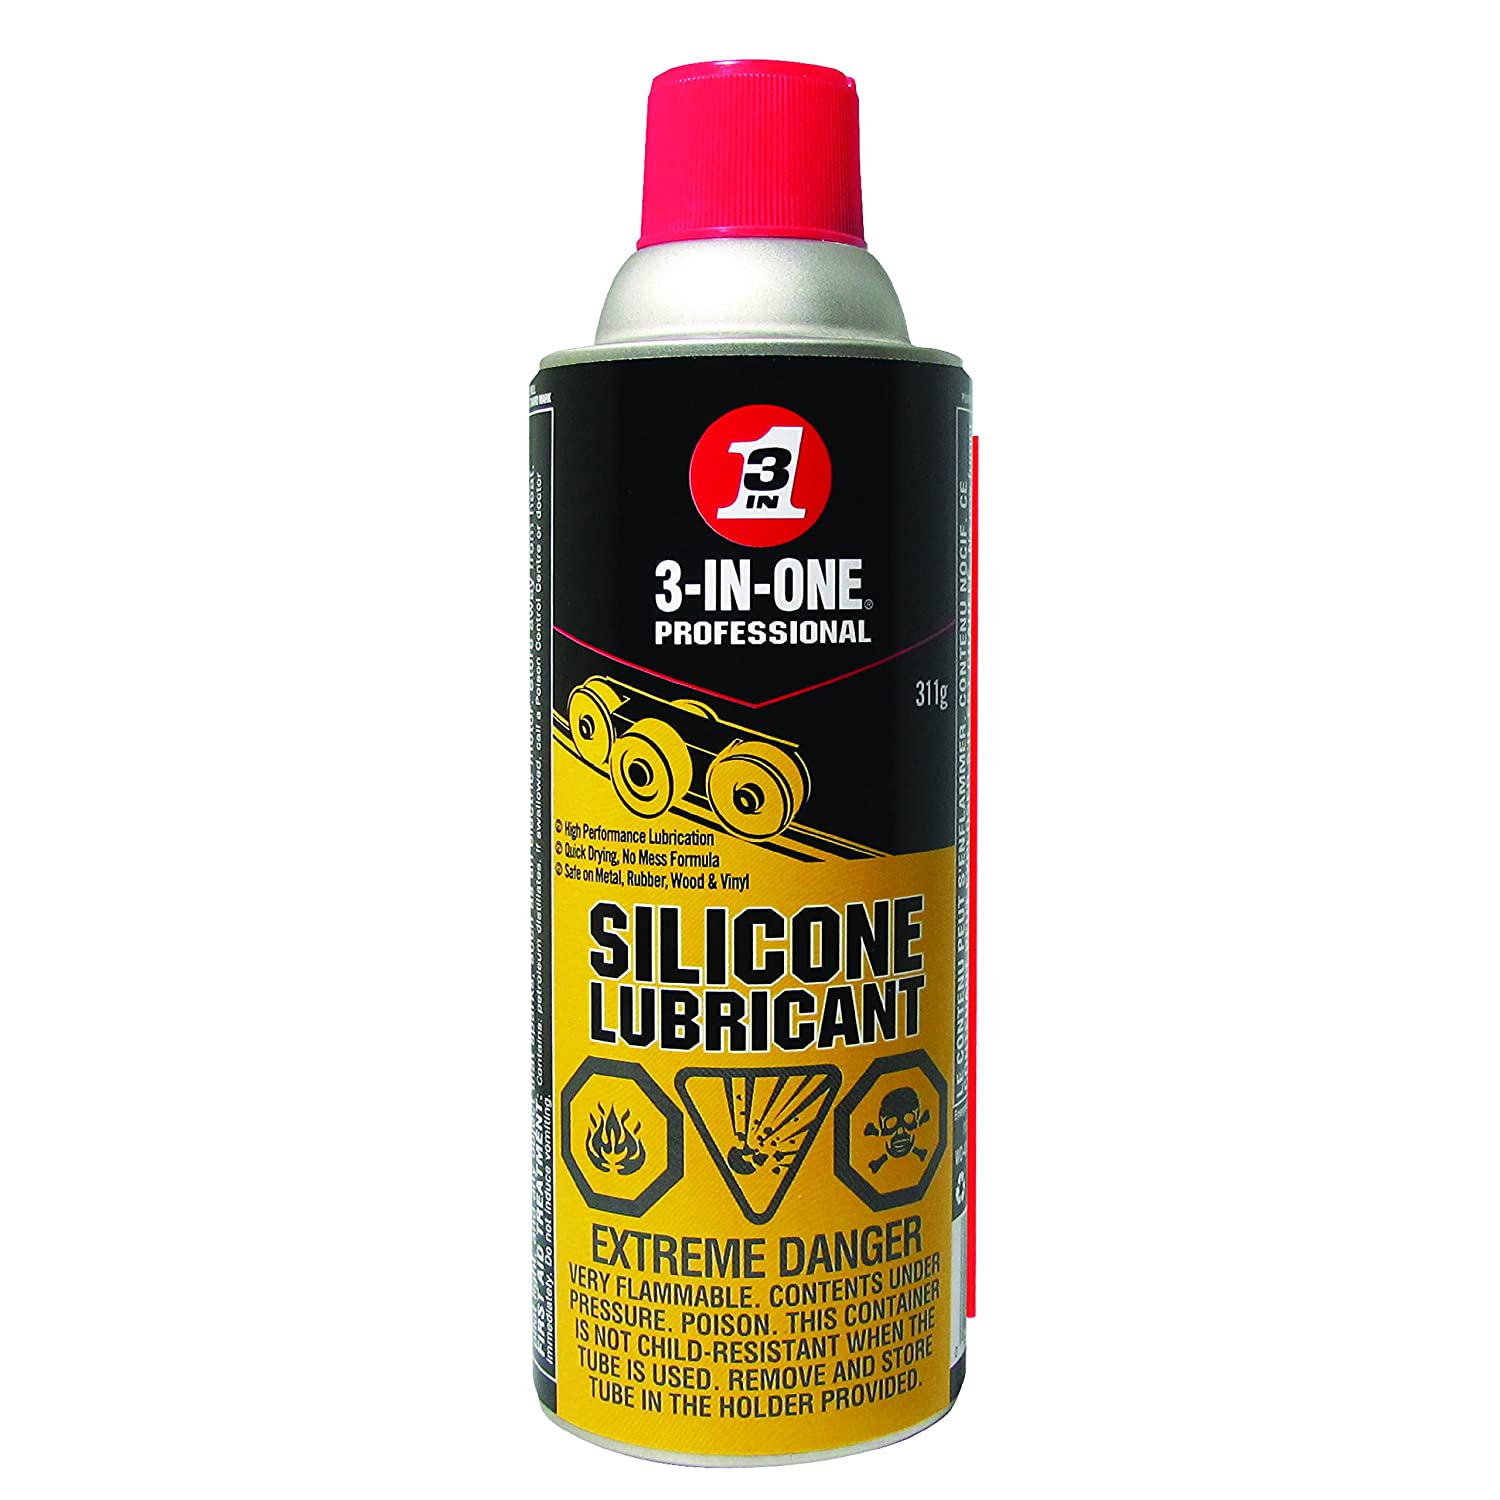 3-in-ONE Professional High Performance Silicone Lubricant - 311g Aerosol Can